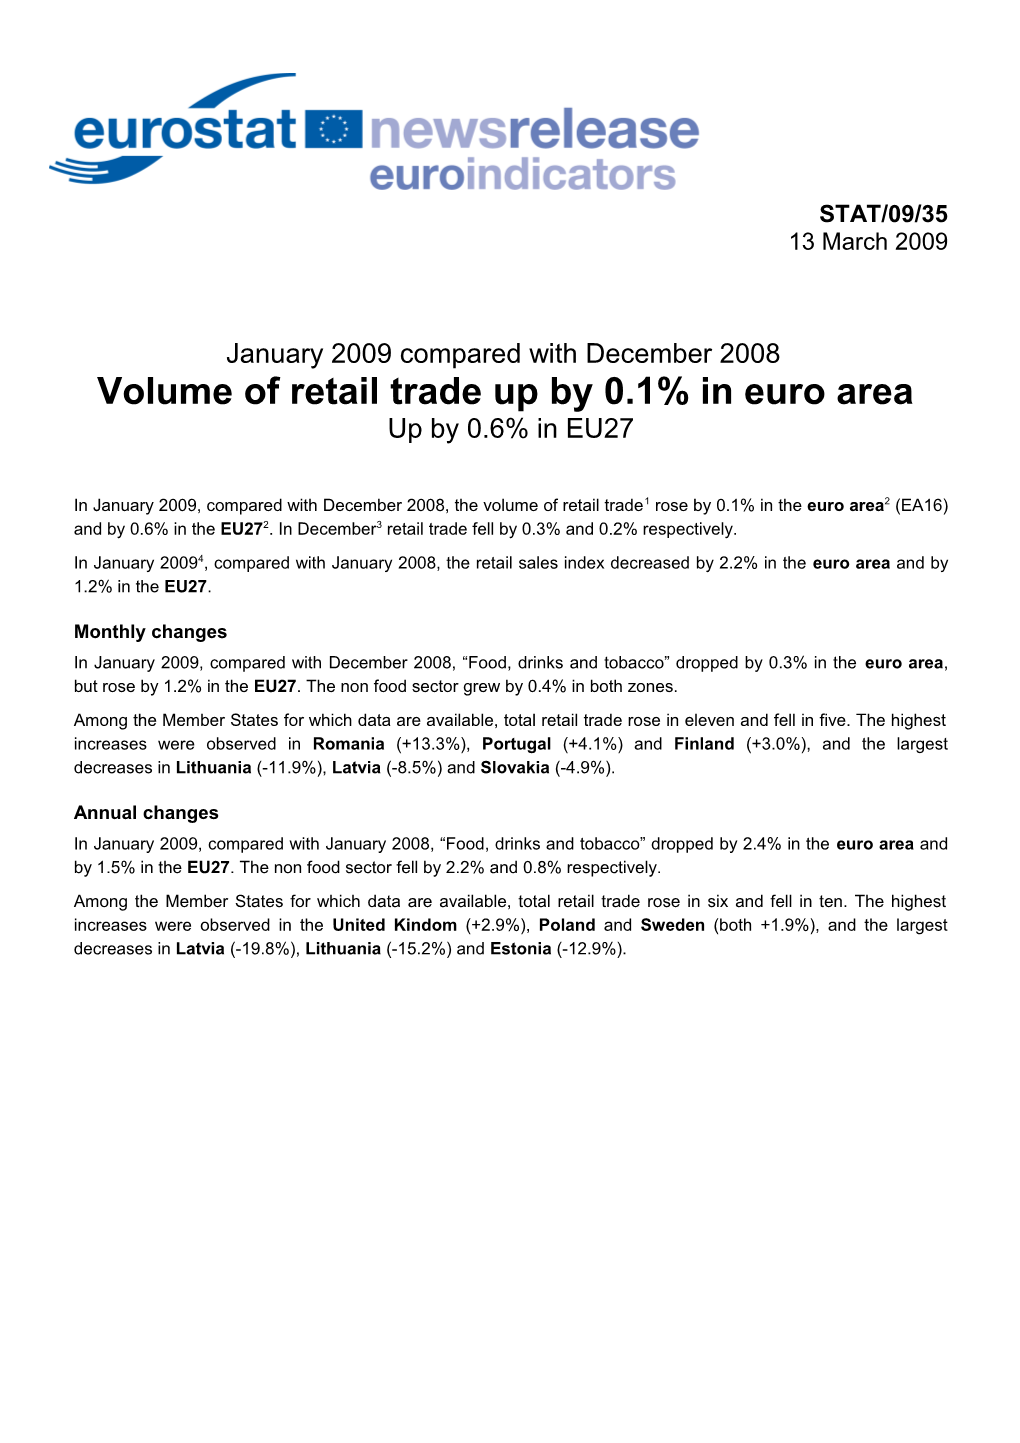 January 2009 Compared with December 2008 Volume of Retail Trade up by 0.1% in Euro Area